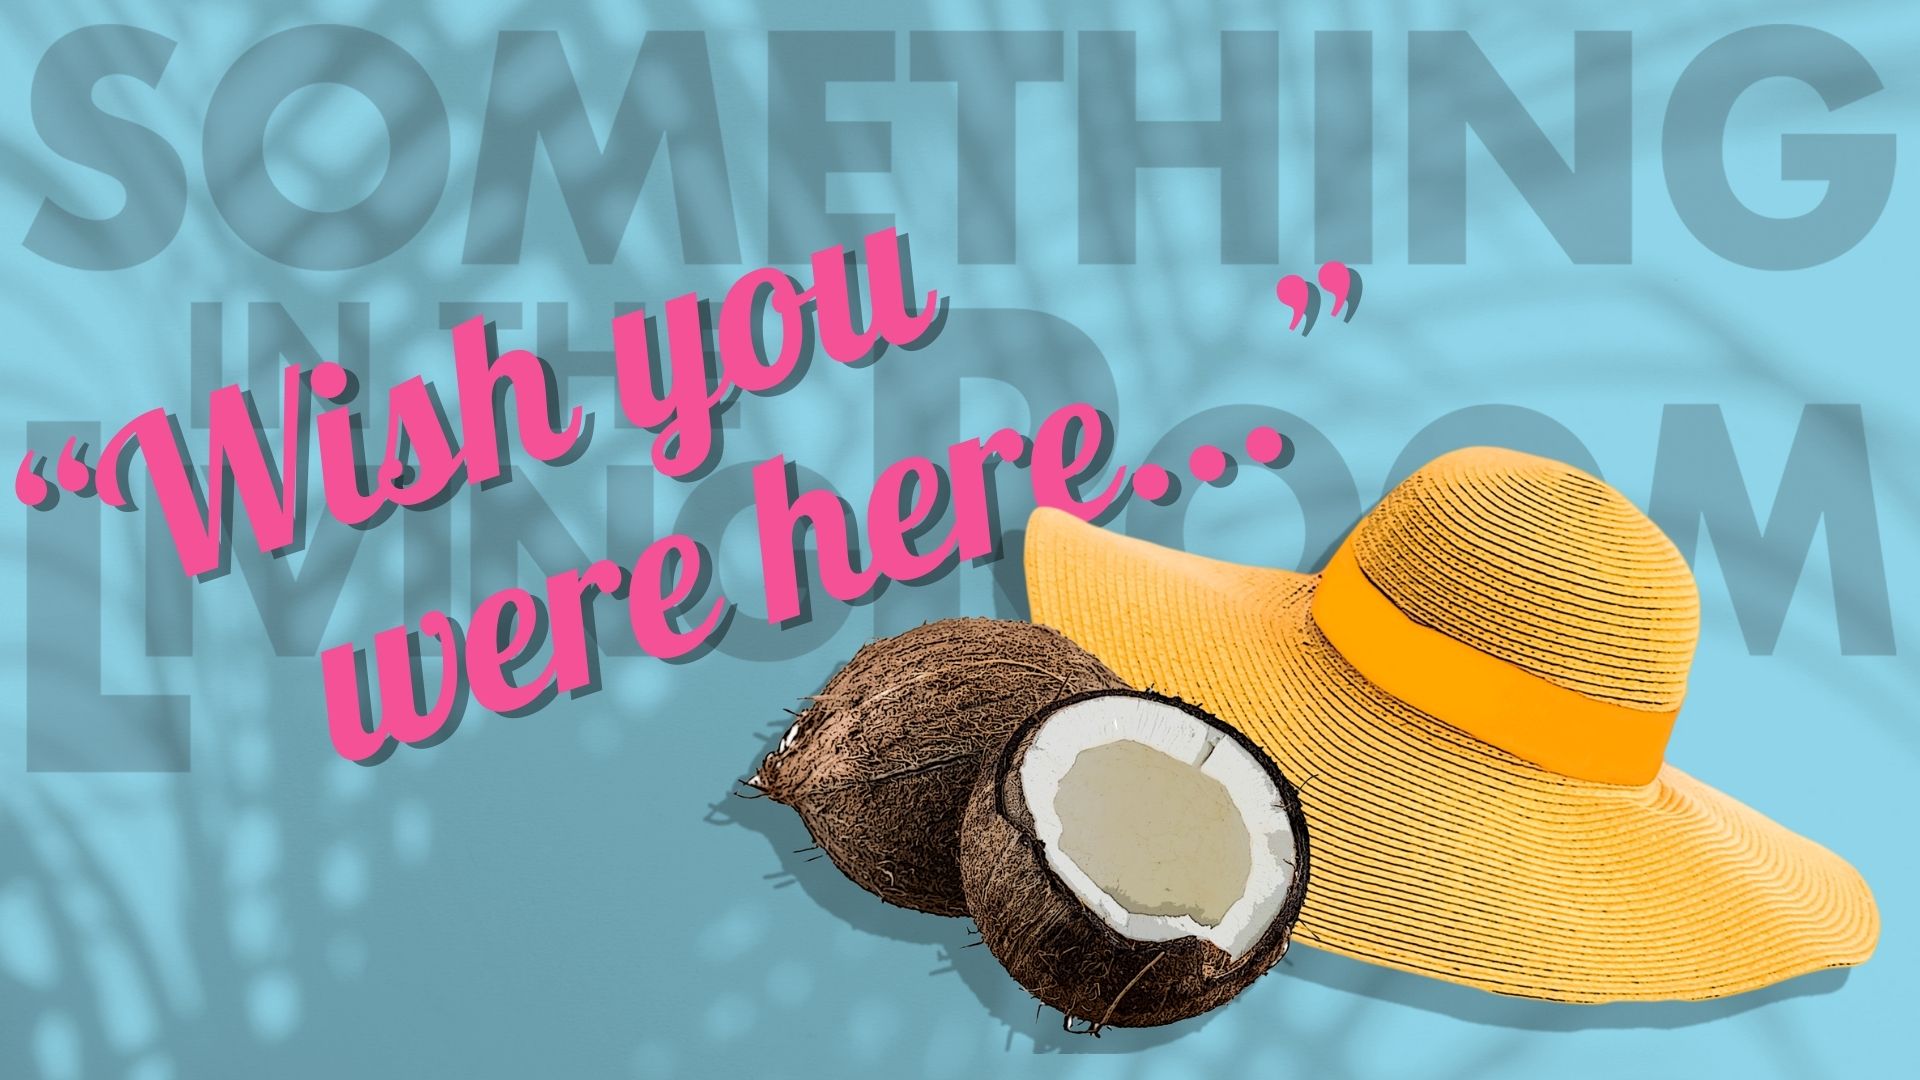 A tropical blue background with light shadows of palm fronds. A yellow beach hat and coconuts are in the foreground. Pink text reads "Wish you were here..."